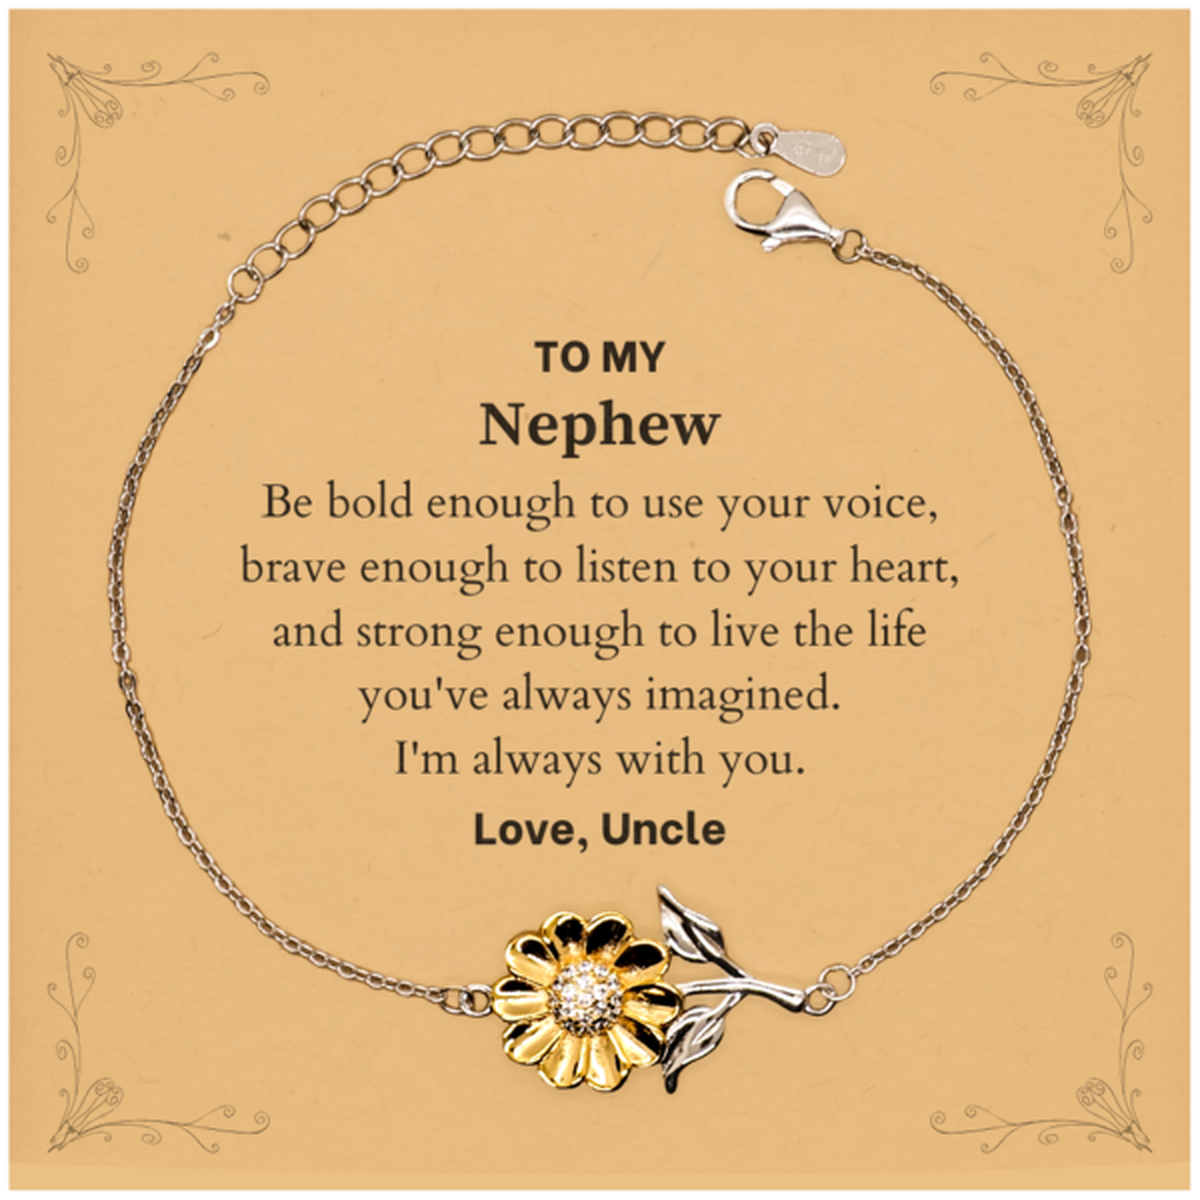 Keepsake Nephew Sunflower Bracelet Gift Idea Graduation Christmas Birthday Nephew from Uncle, Nephew Be bold enough to use your voice, brave enough to listen to your heart. Love, Uncle